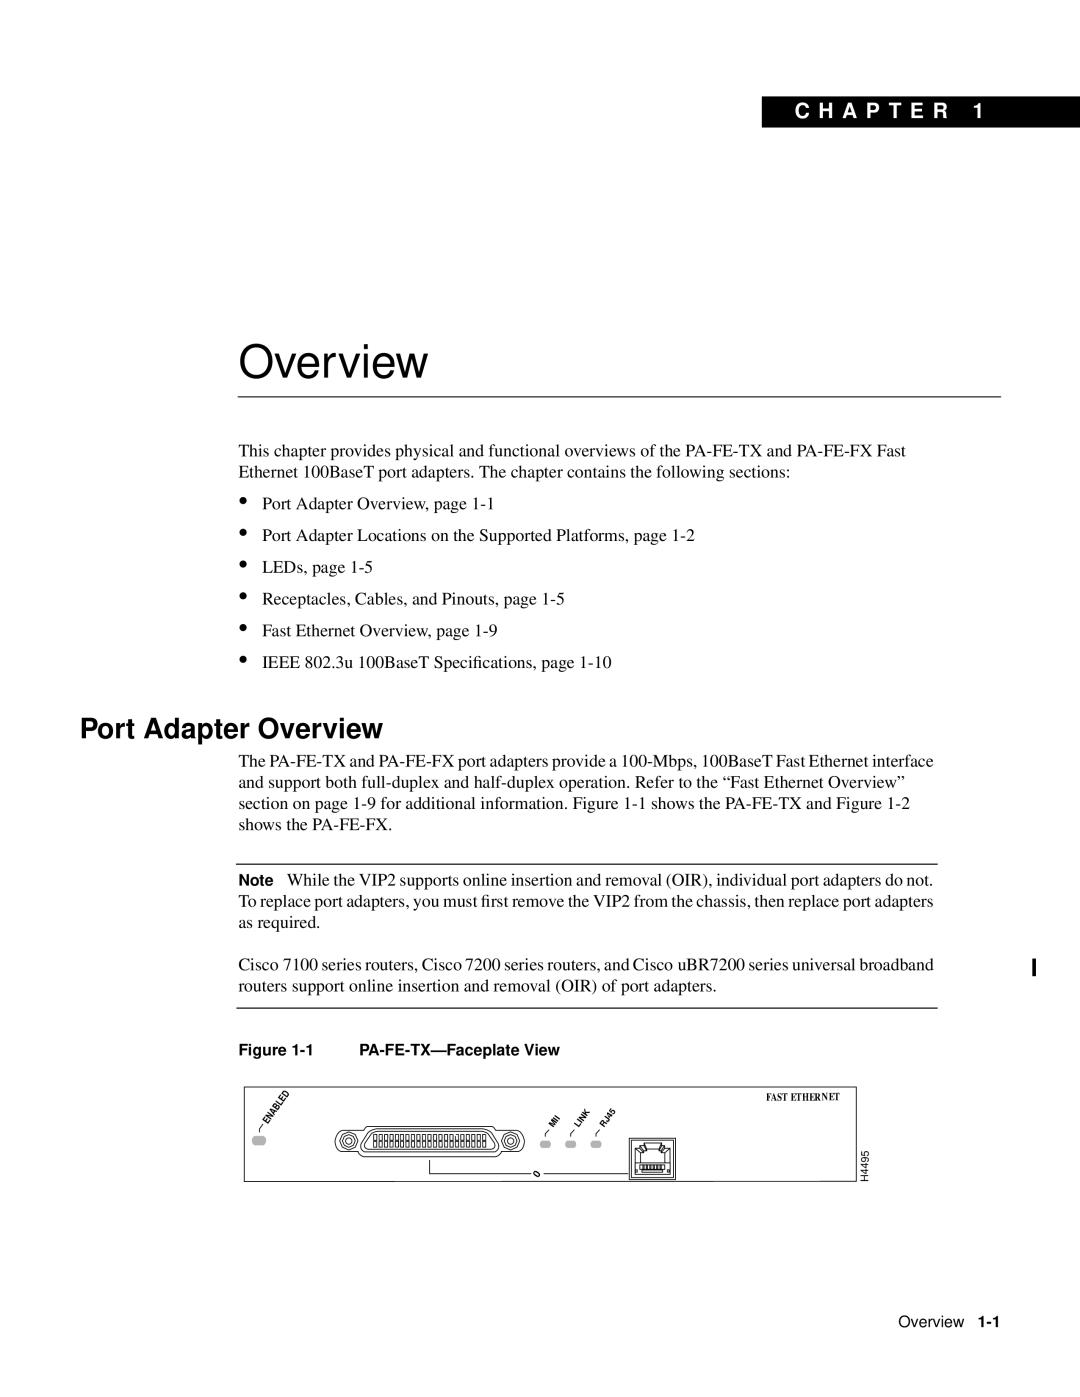 Cisco Systems PA-FE-FX, PA-FE-TX manual Port Adapter Overview, C H A P T E R 